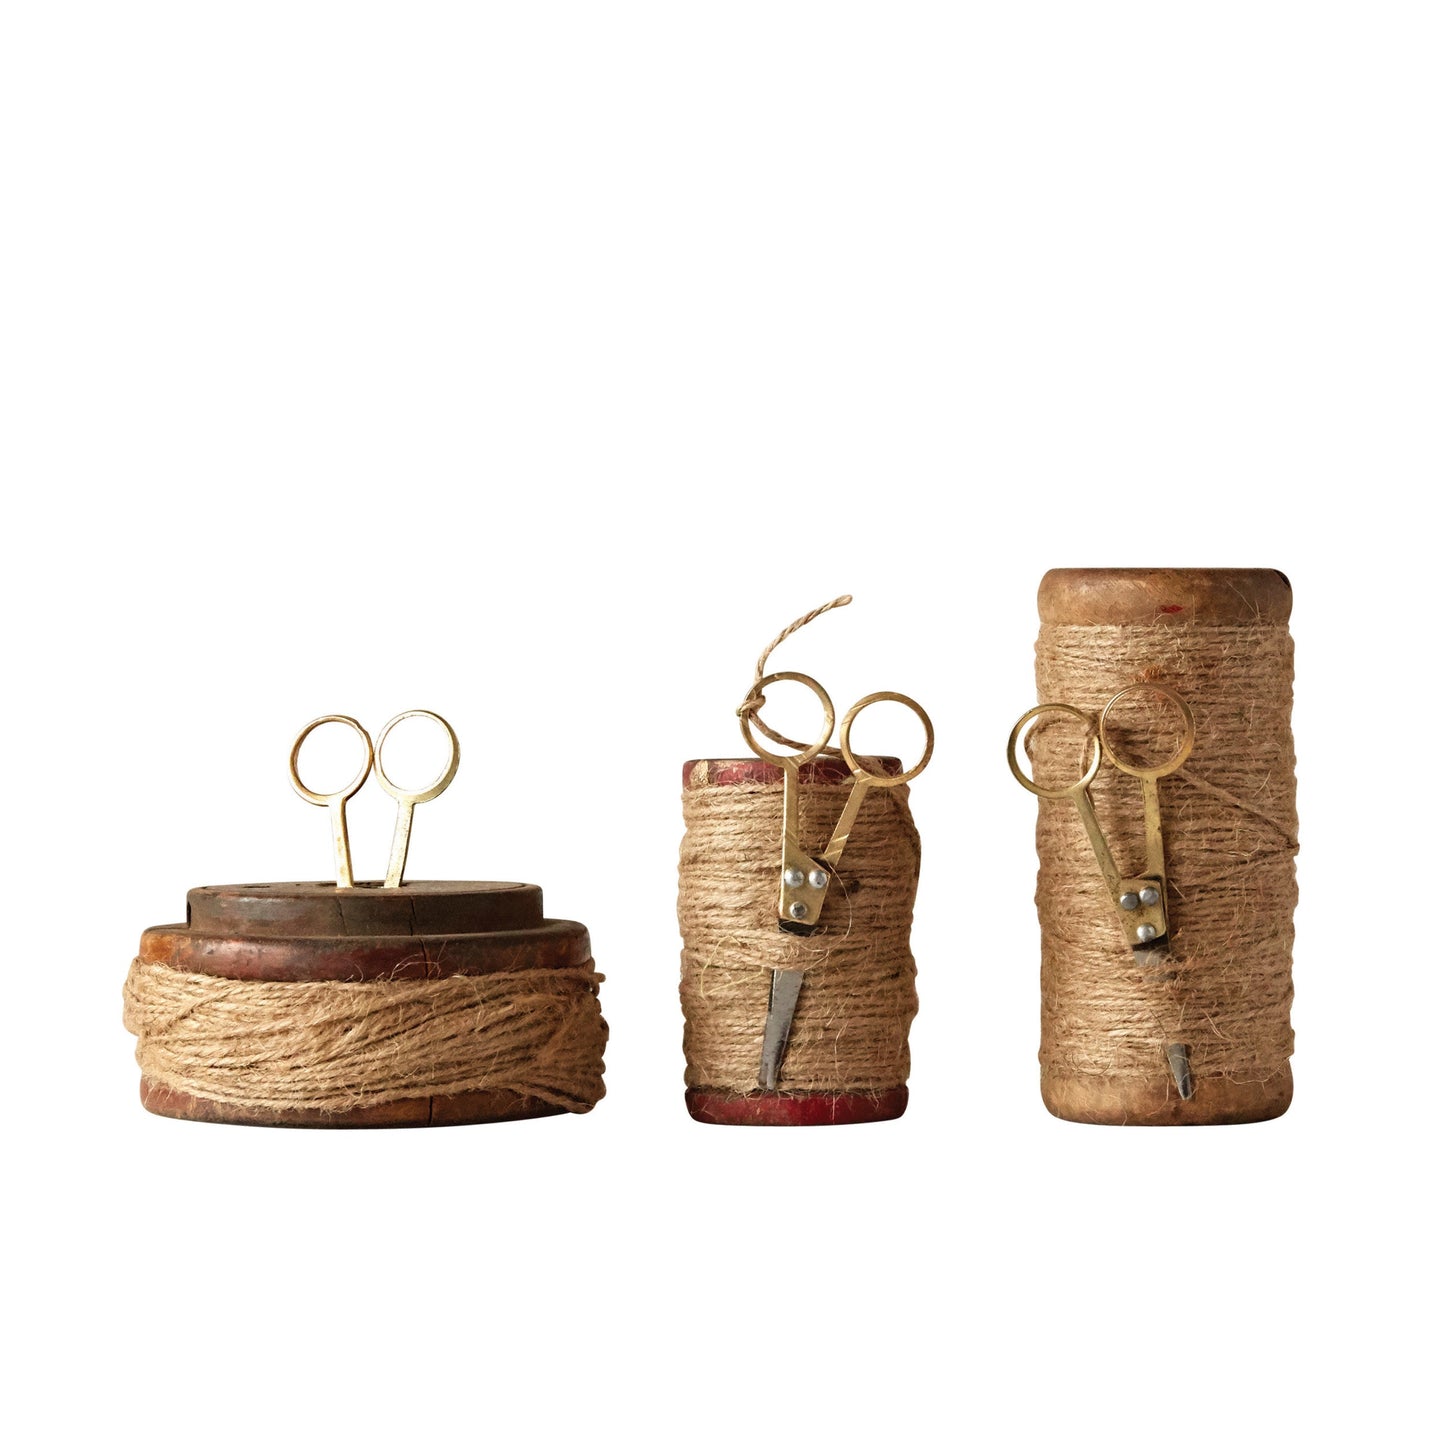 Wooden Spools with Jute and Scissors